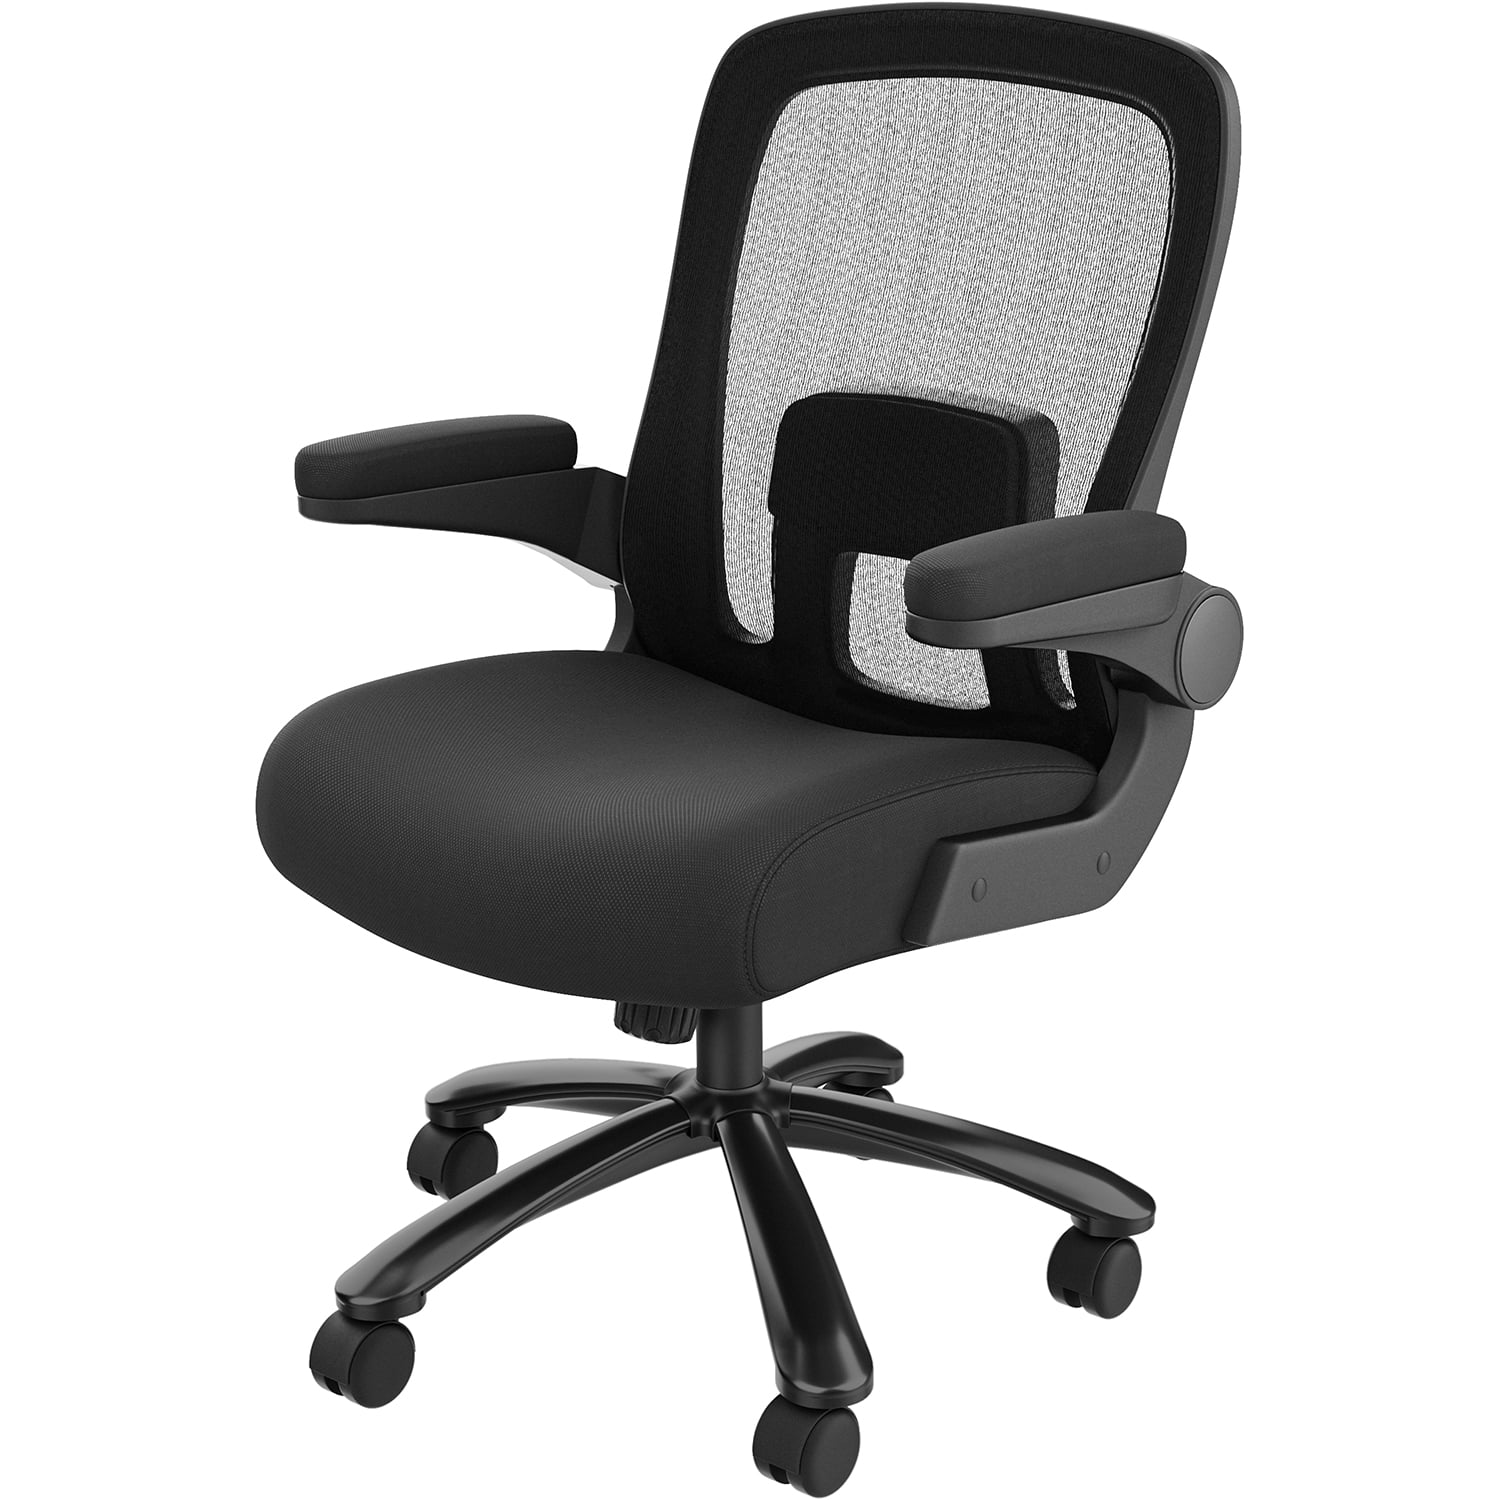 RIF6 Big and Tall Chair with Adjustable Lumbar Support